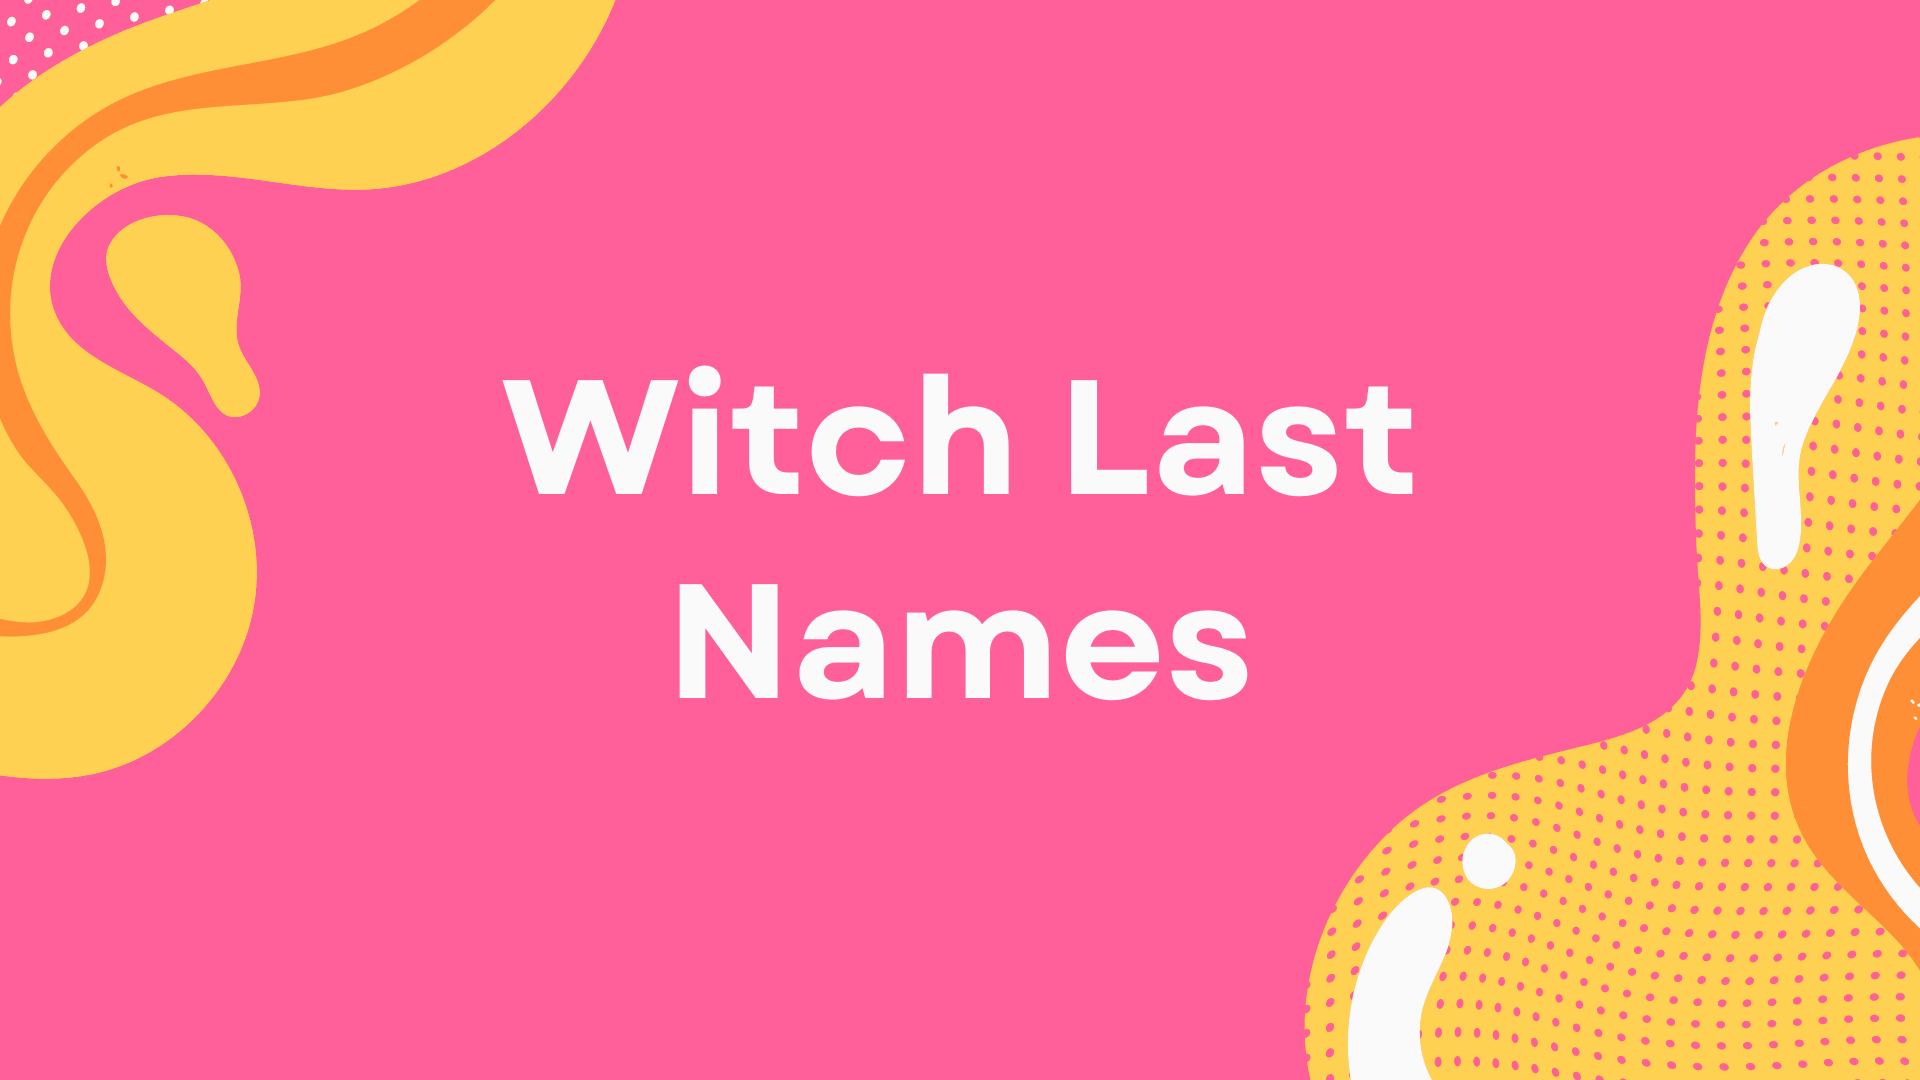 135 Witch Last Names With Meanings (+Witchy Last Names)